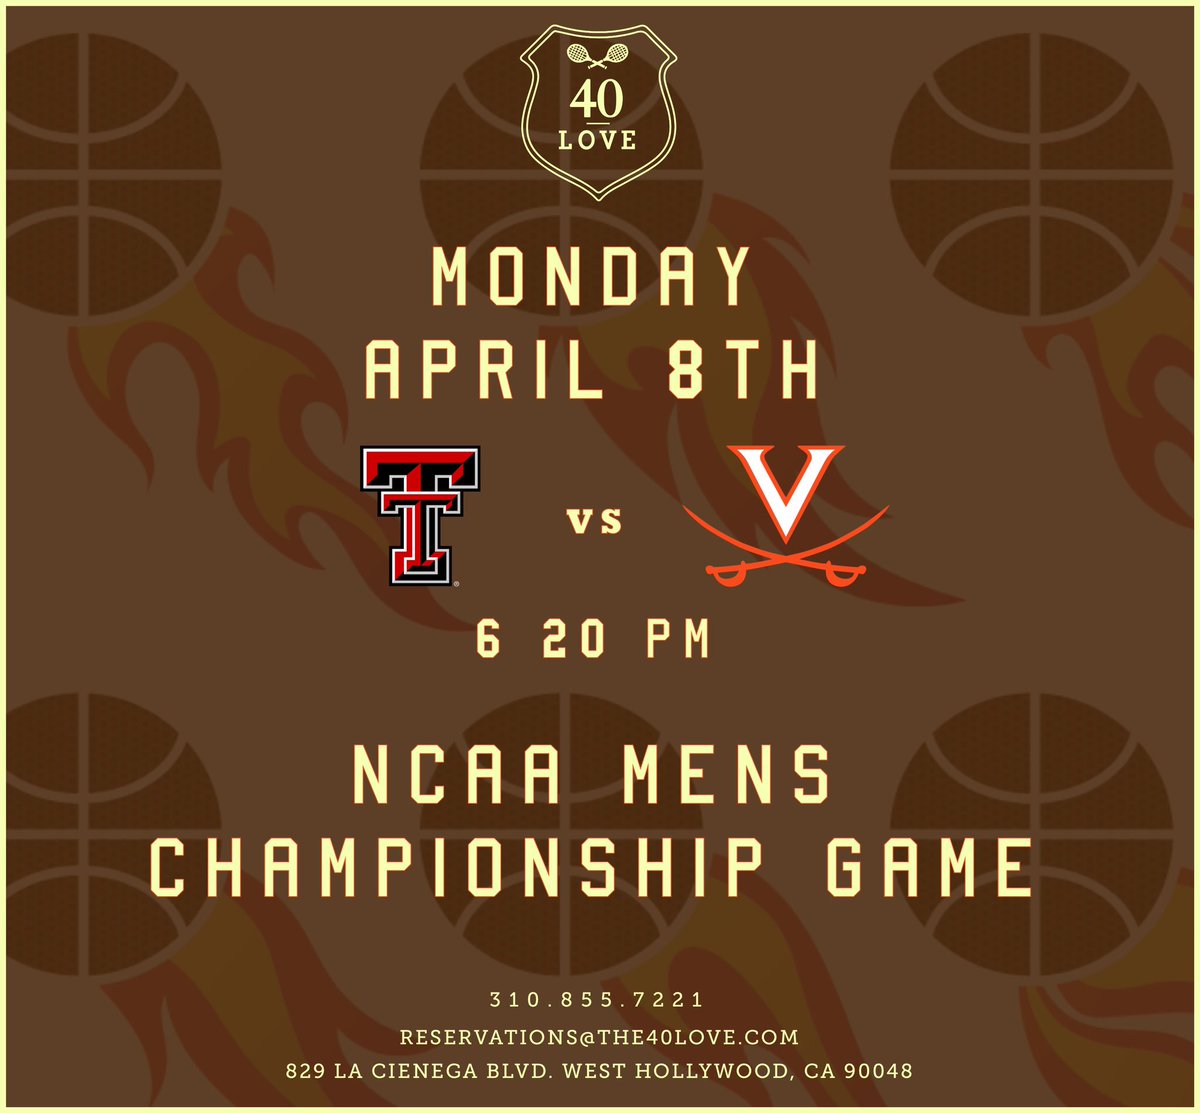 The #MarchMadness CHAMPIONSHIP is here! 🙌🏀 Tonight is THE night - get here early to watch the game here, get down on some @themckitchen wings & get LOUD! See you soon... tip-off is at 6:20PM! #ncaabasketball #nationalchampionship #40Love